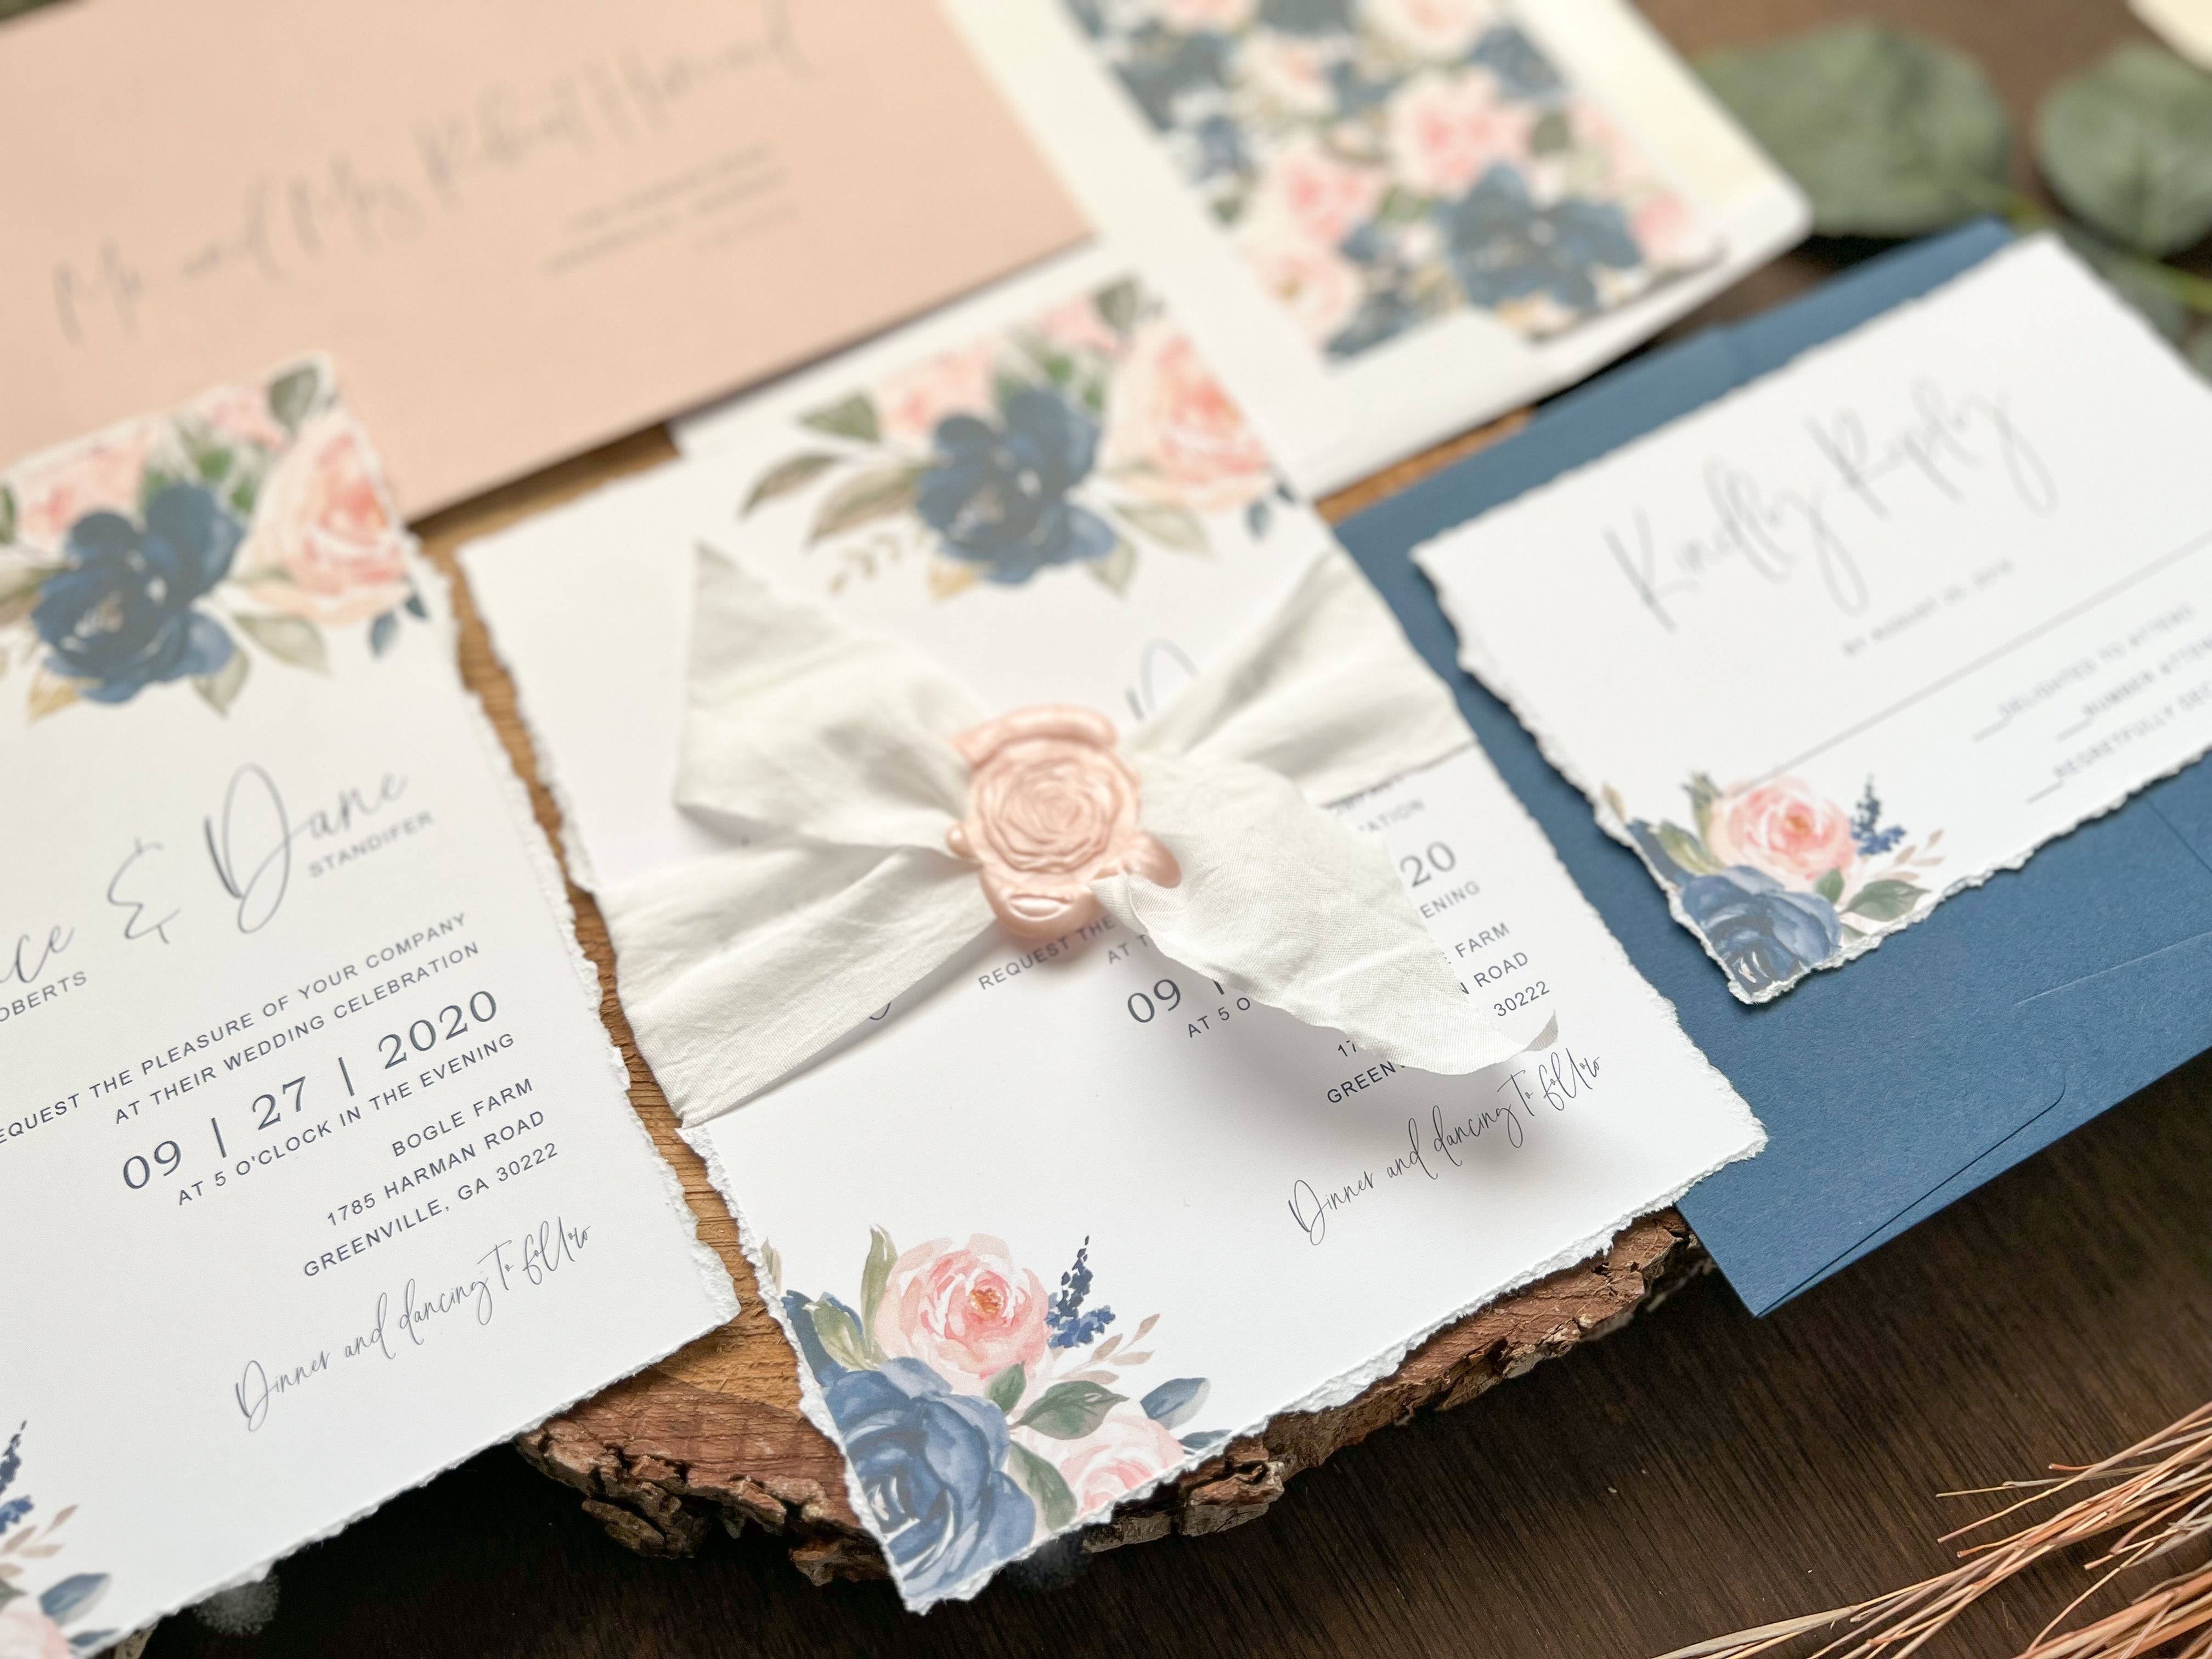 Navy Blue and Blush Pink Wedding Invitation with Deckled Edge, White Ribbon, Wax Seal and Greenery